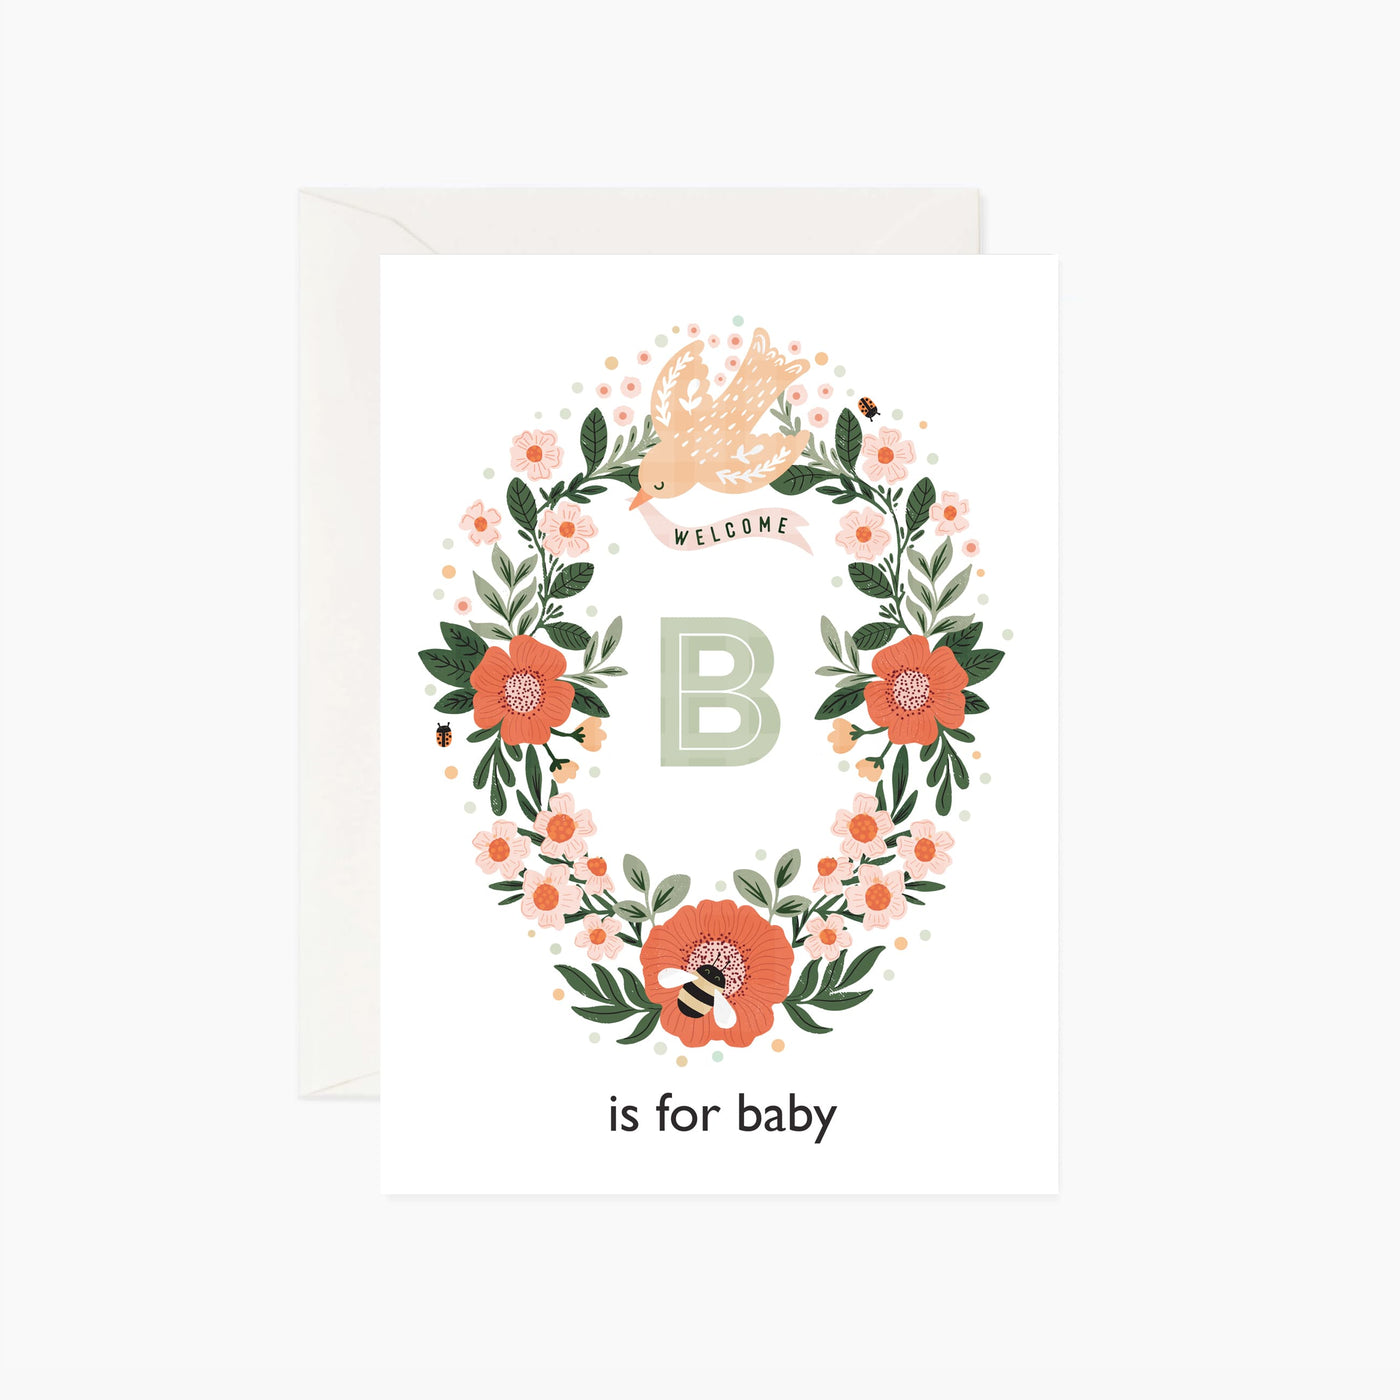 B is for Baby- White